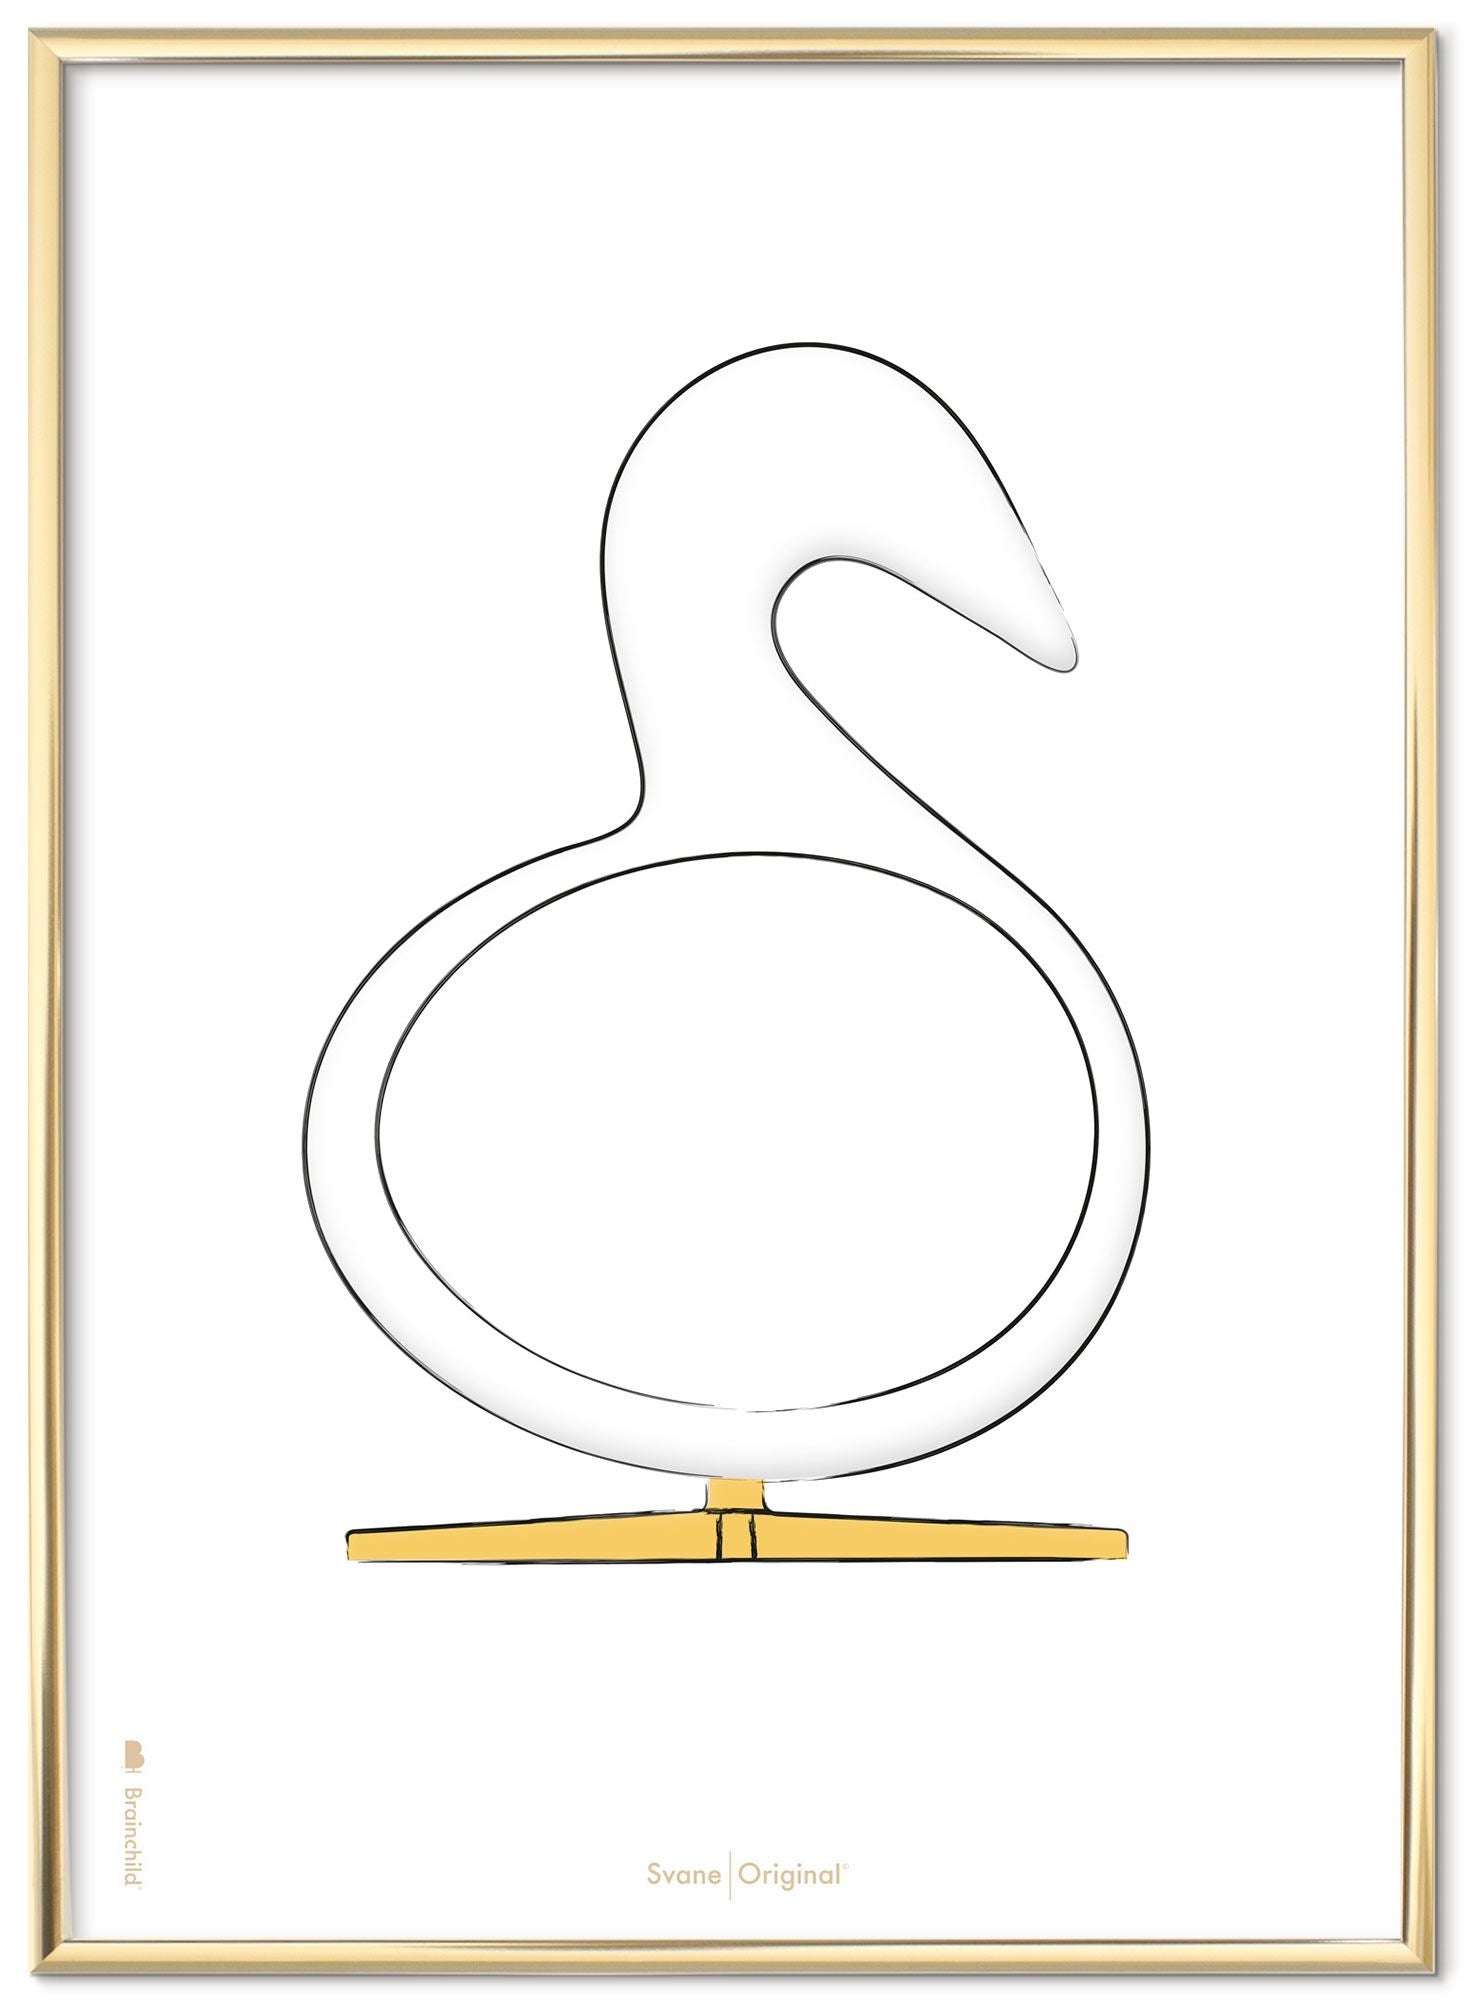 Brainchild Swan Design Sketch Poster Frame Made Of Brass Colored Metal 30x40 Cm, White Background